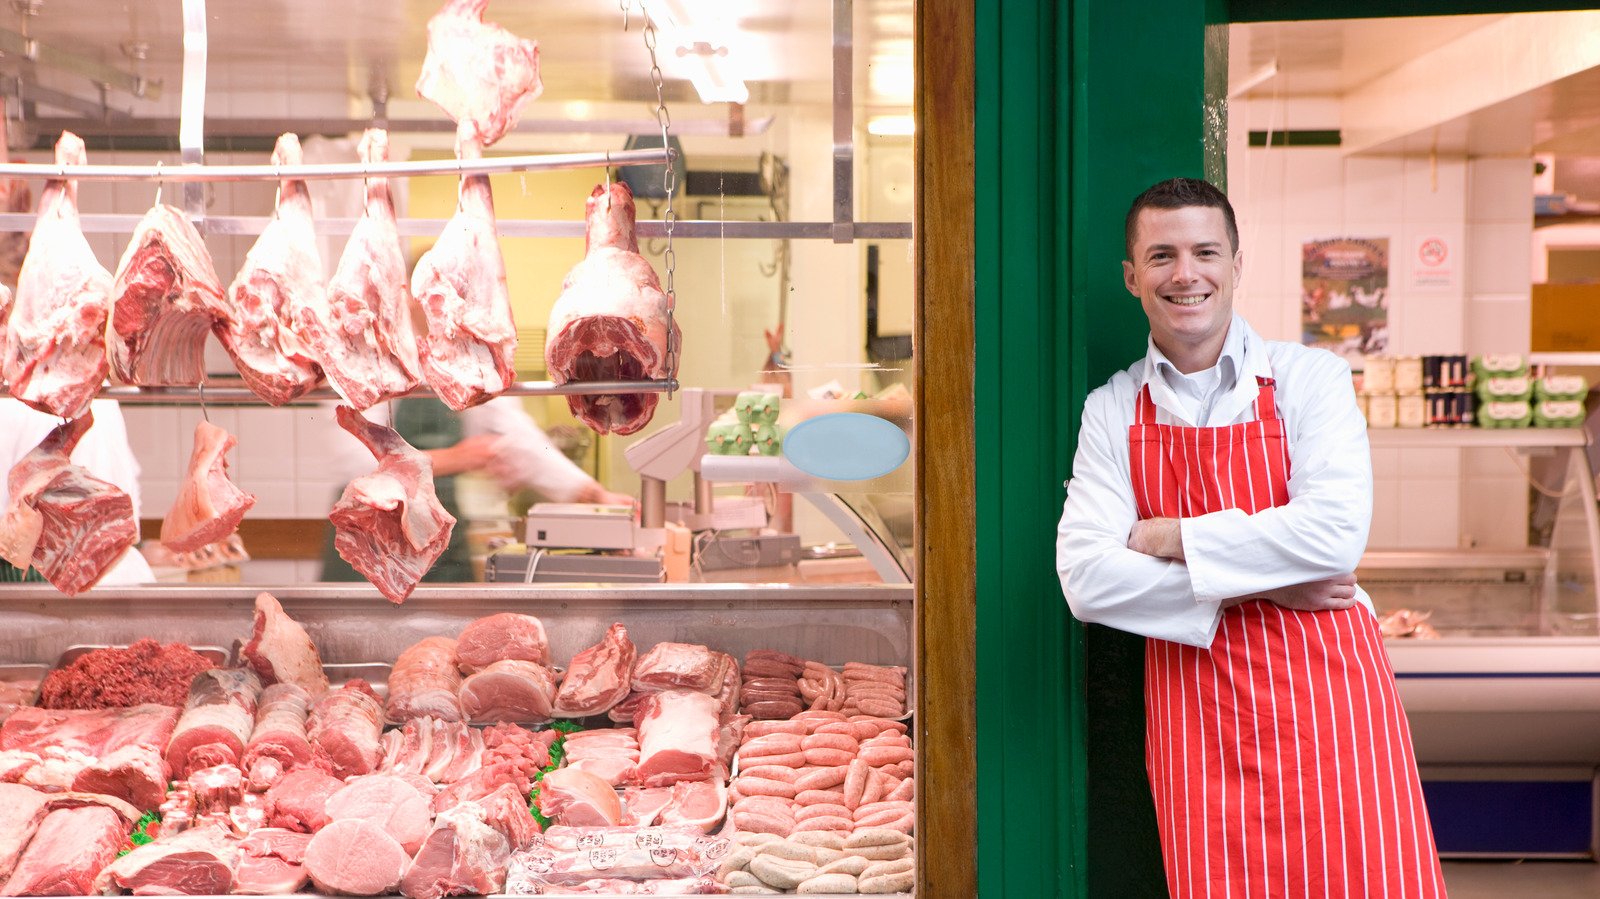 How Much Does a Butcher Make Per Hour